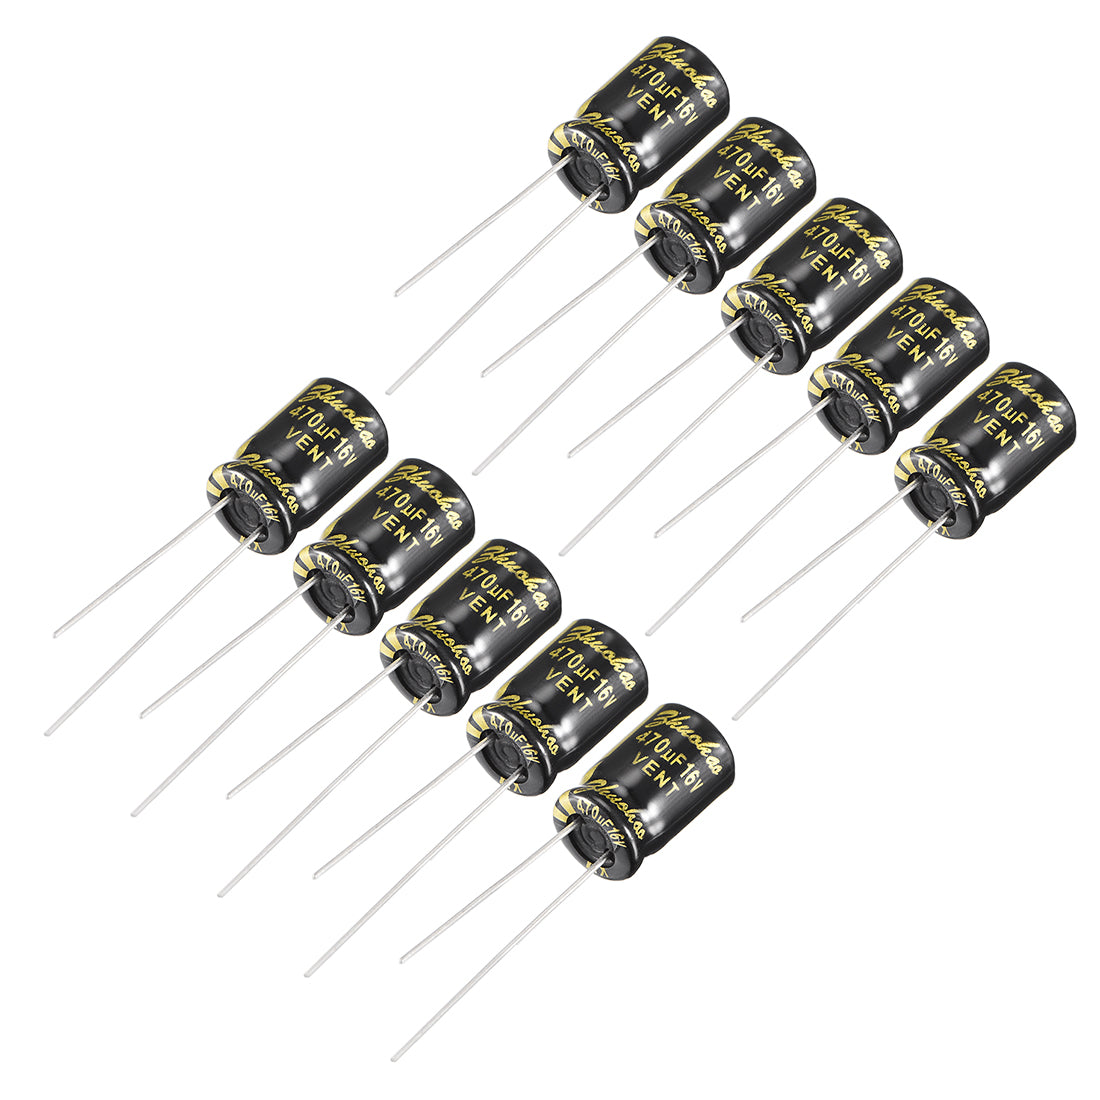 uxcell Uxcell Aluminum Radial Electrolytic Capacitor with 470uF 16V 105 Celsius Life 2000H 8 x 12 mm Black 10pcs